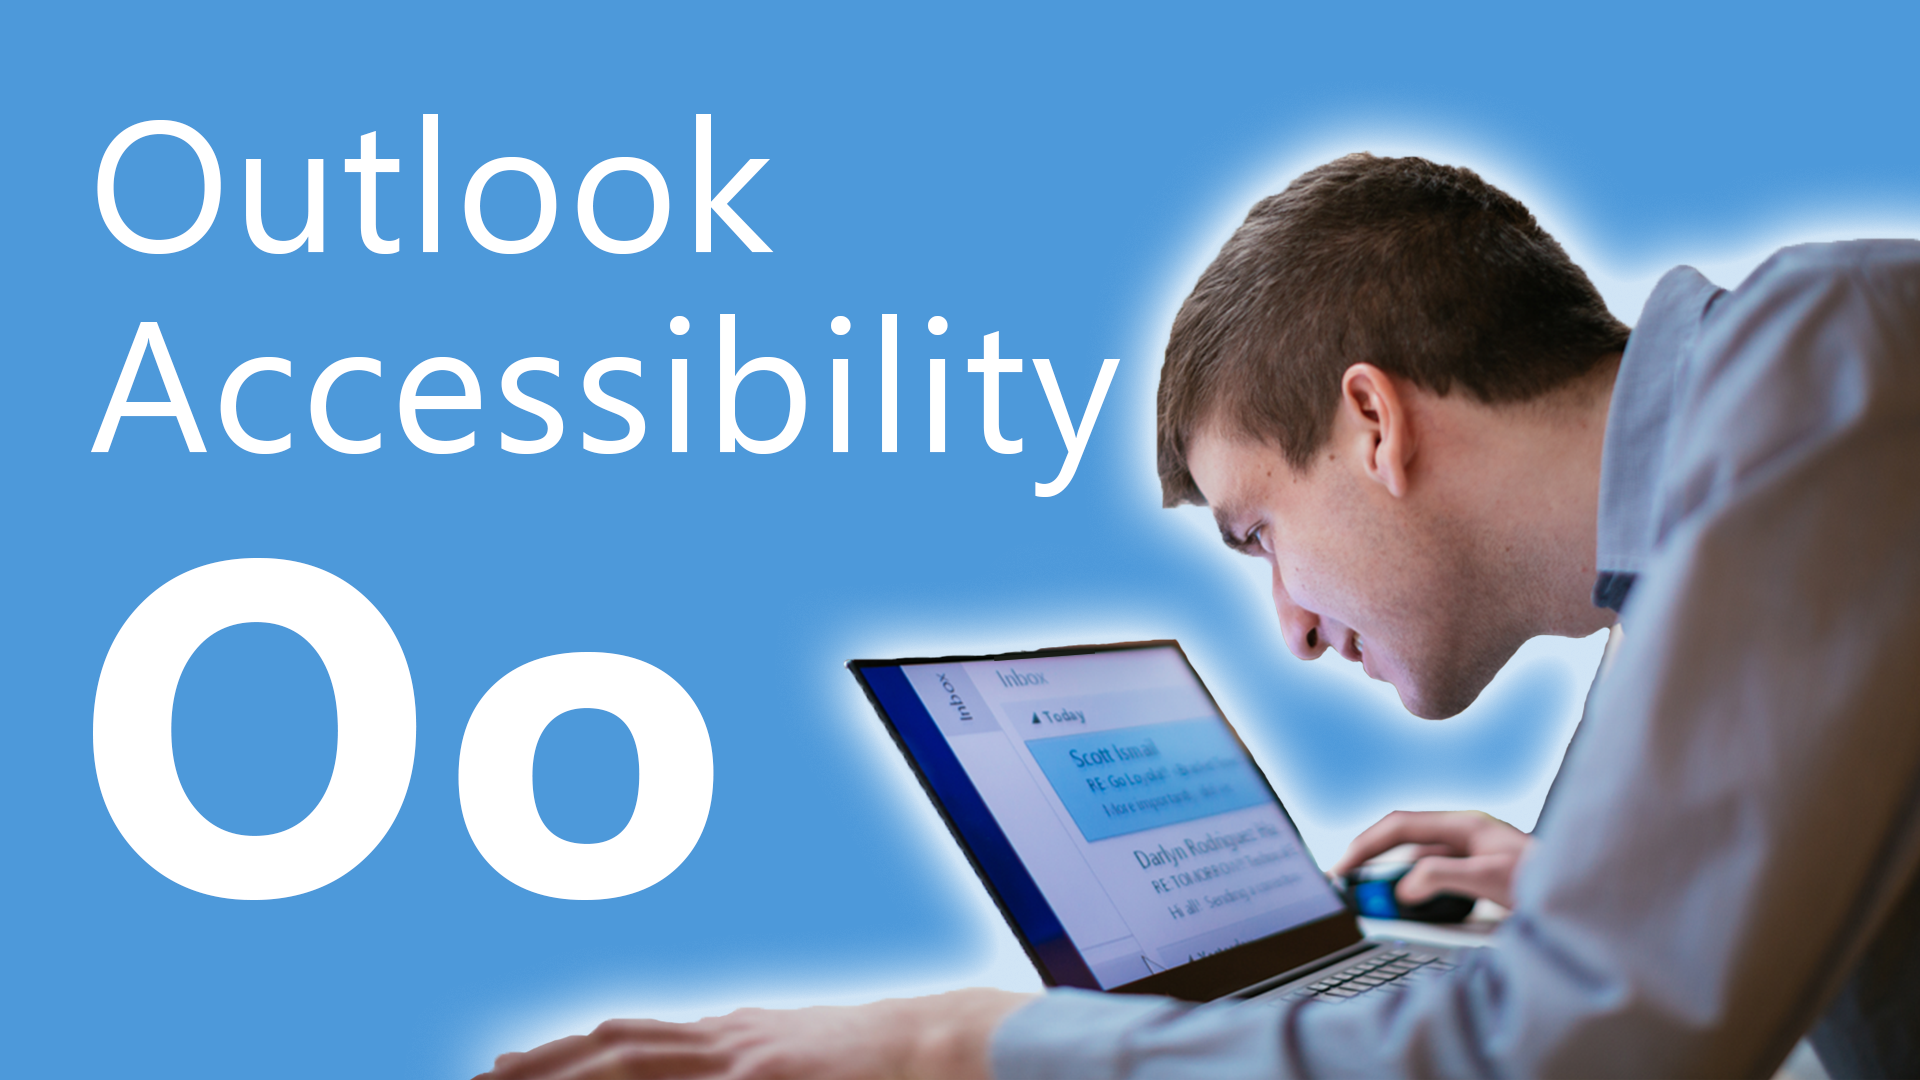 O is for Outlook Accessibility. Bernardo Villarreal, a man who has low vision, looks closely at a laptop screen as he reads text in big font. 